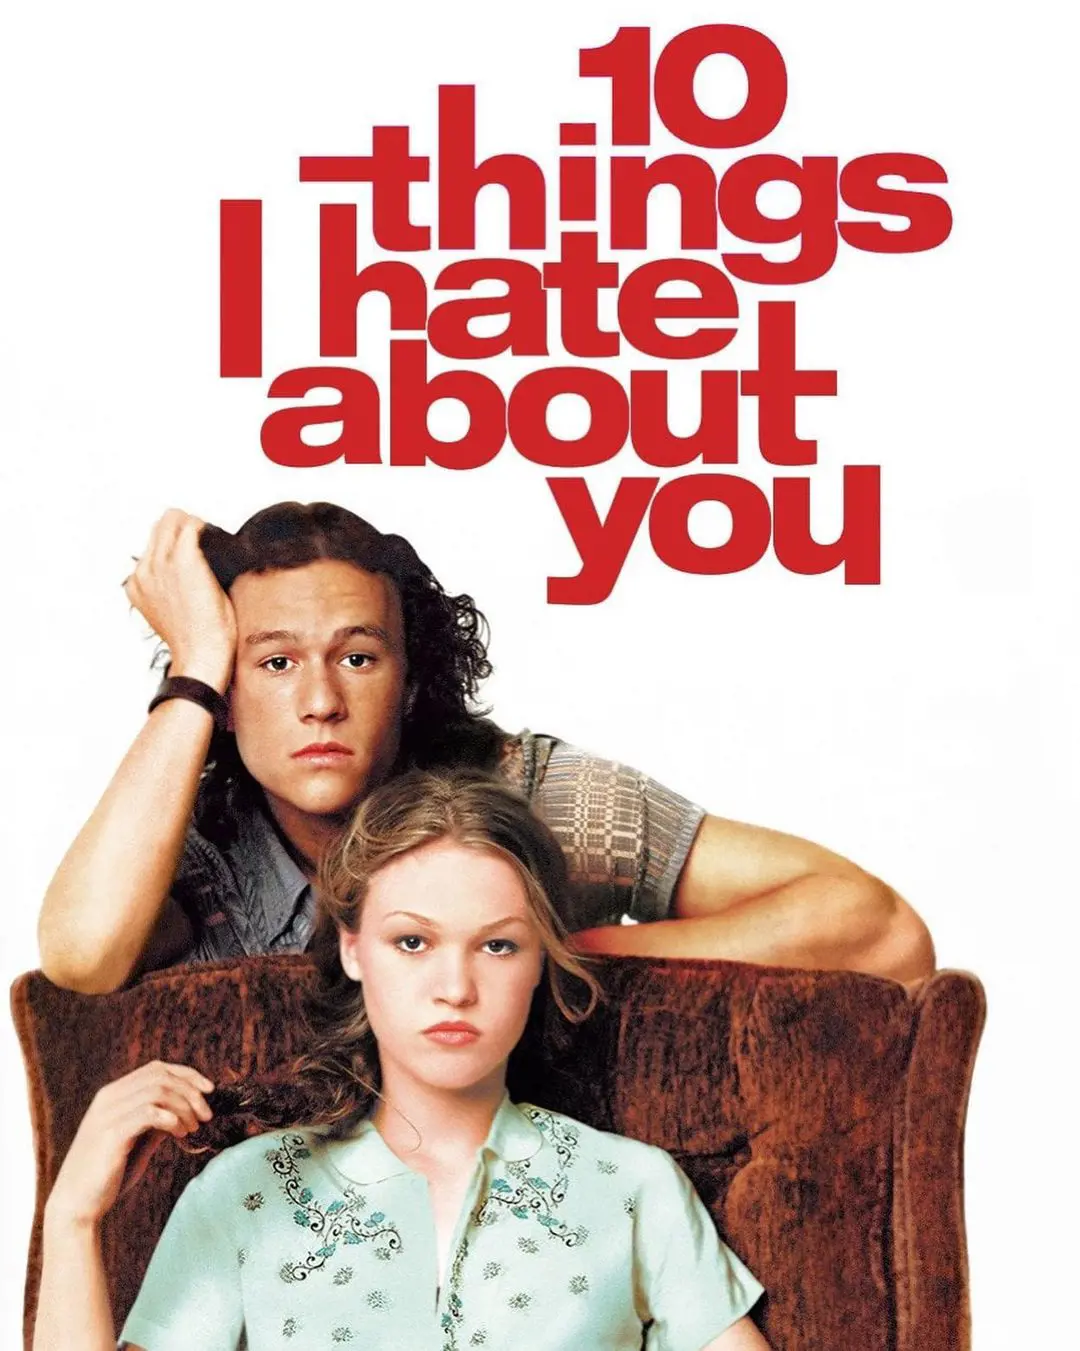 10 Things I Hate About You is coming on Peacock from June